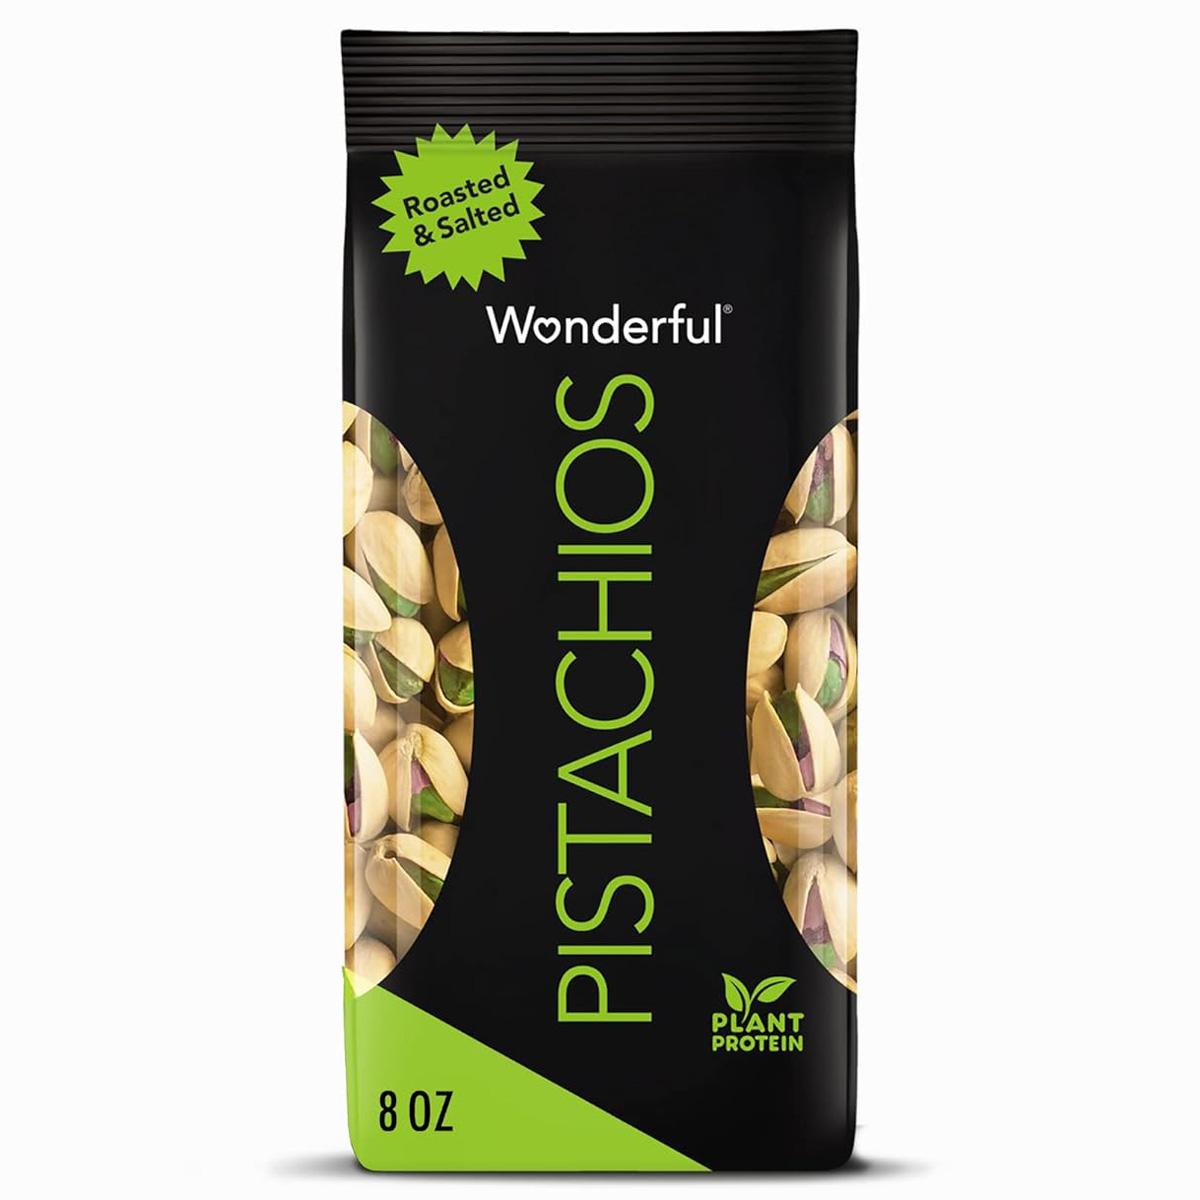 Wonderful Pistachios In Shell Roasted and Salted Nuts 8oz for $2.85